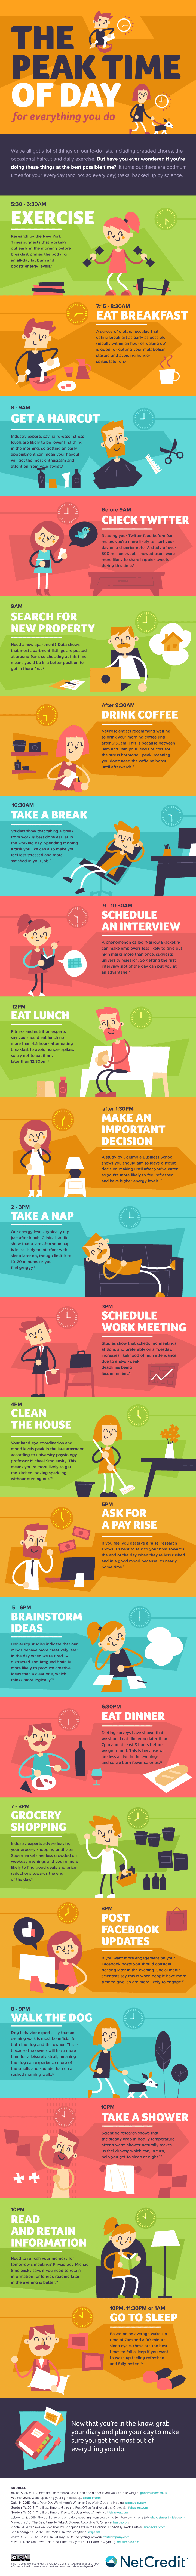 The Peak Time of Day for Everything You Do - #infographic